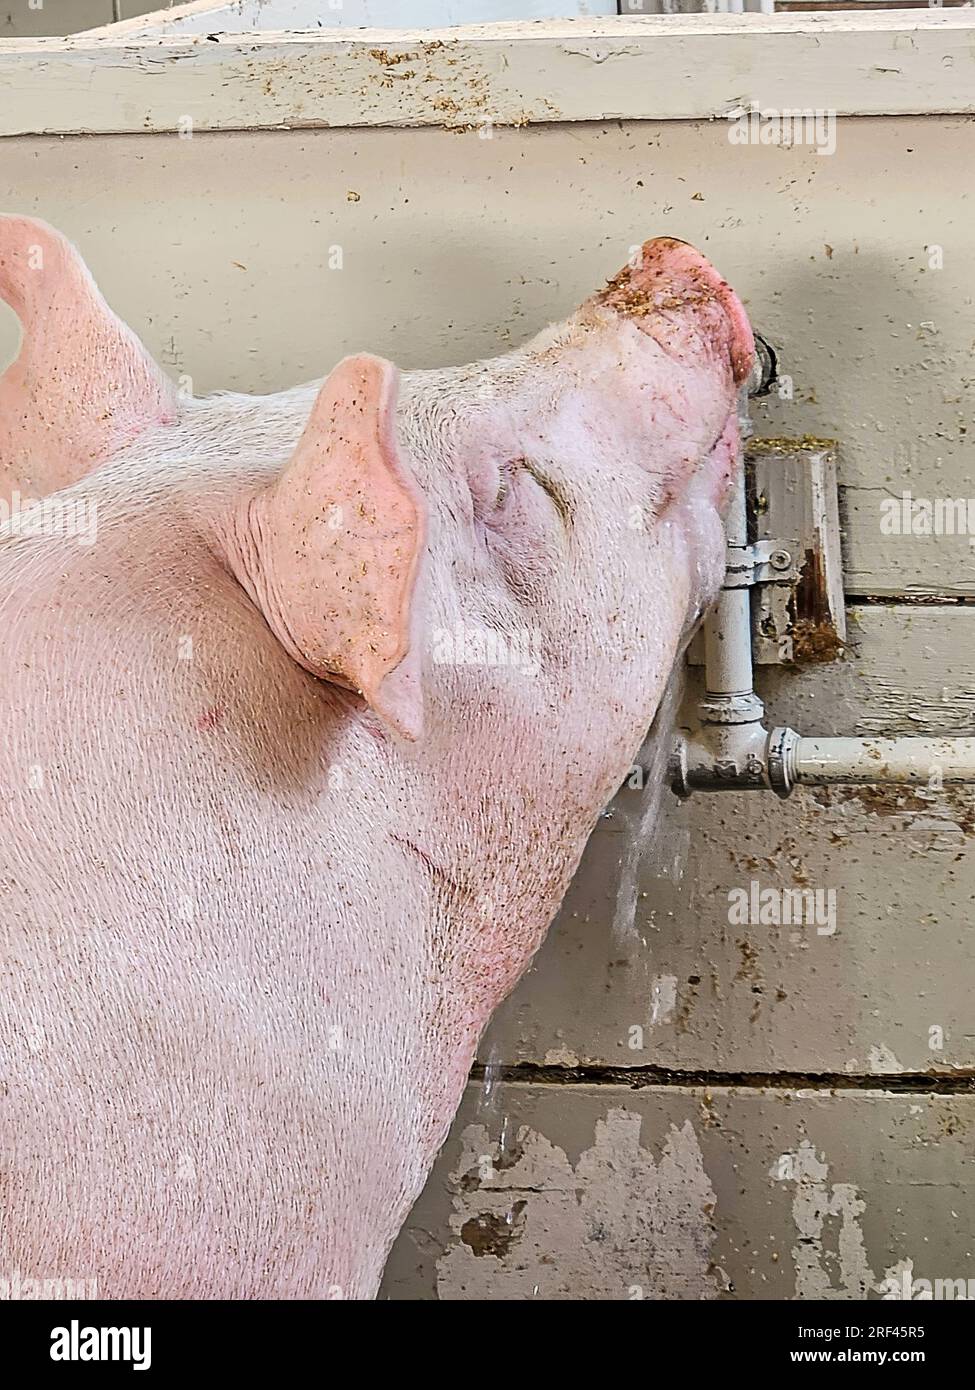 Close-up of a pink pig drinking from a barn faucet Stock Photo